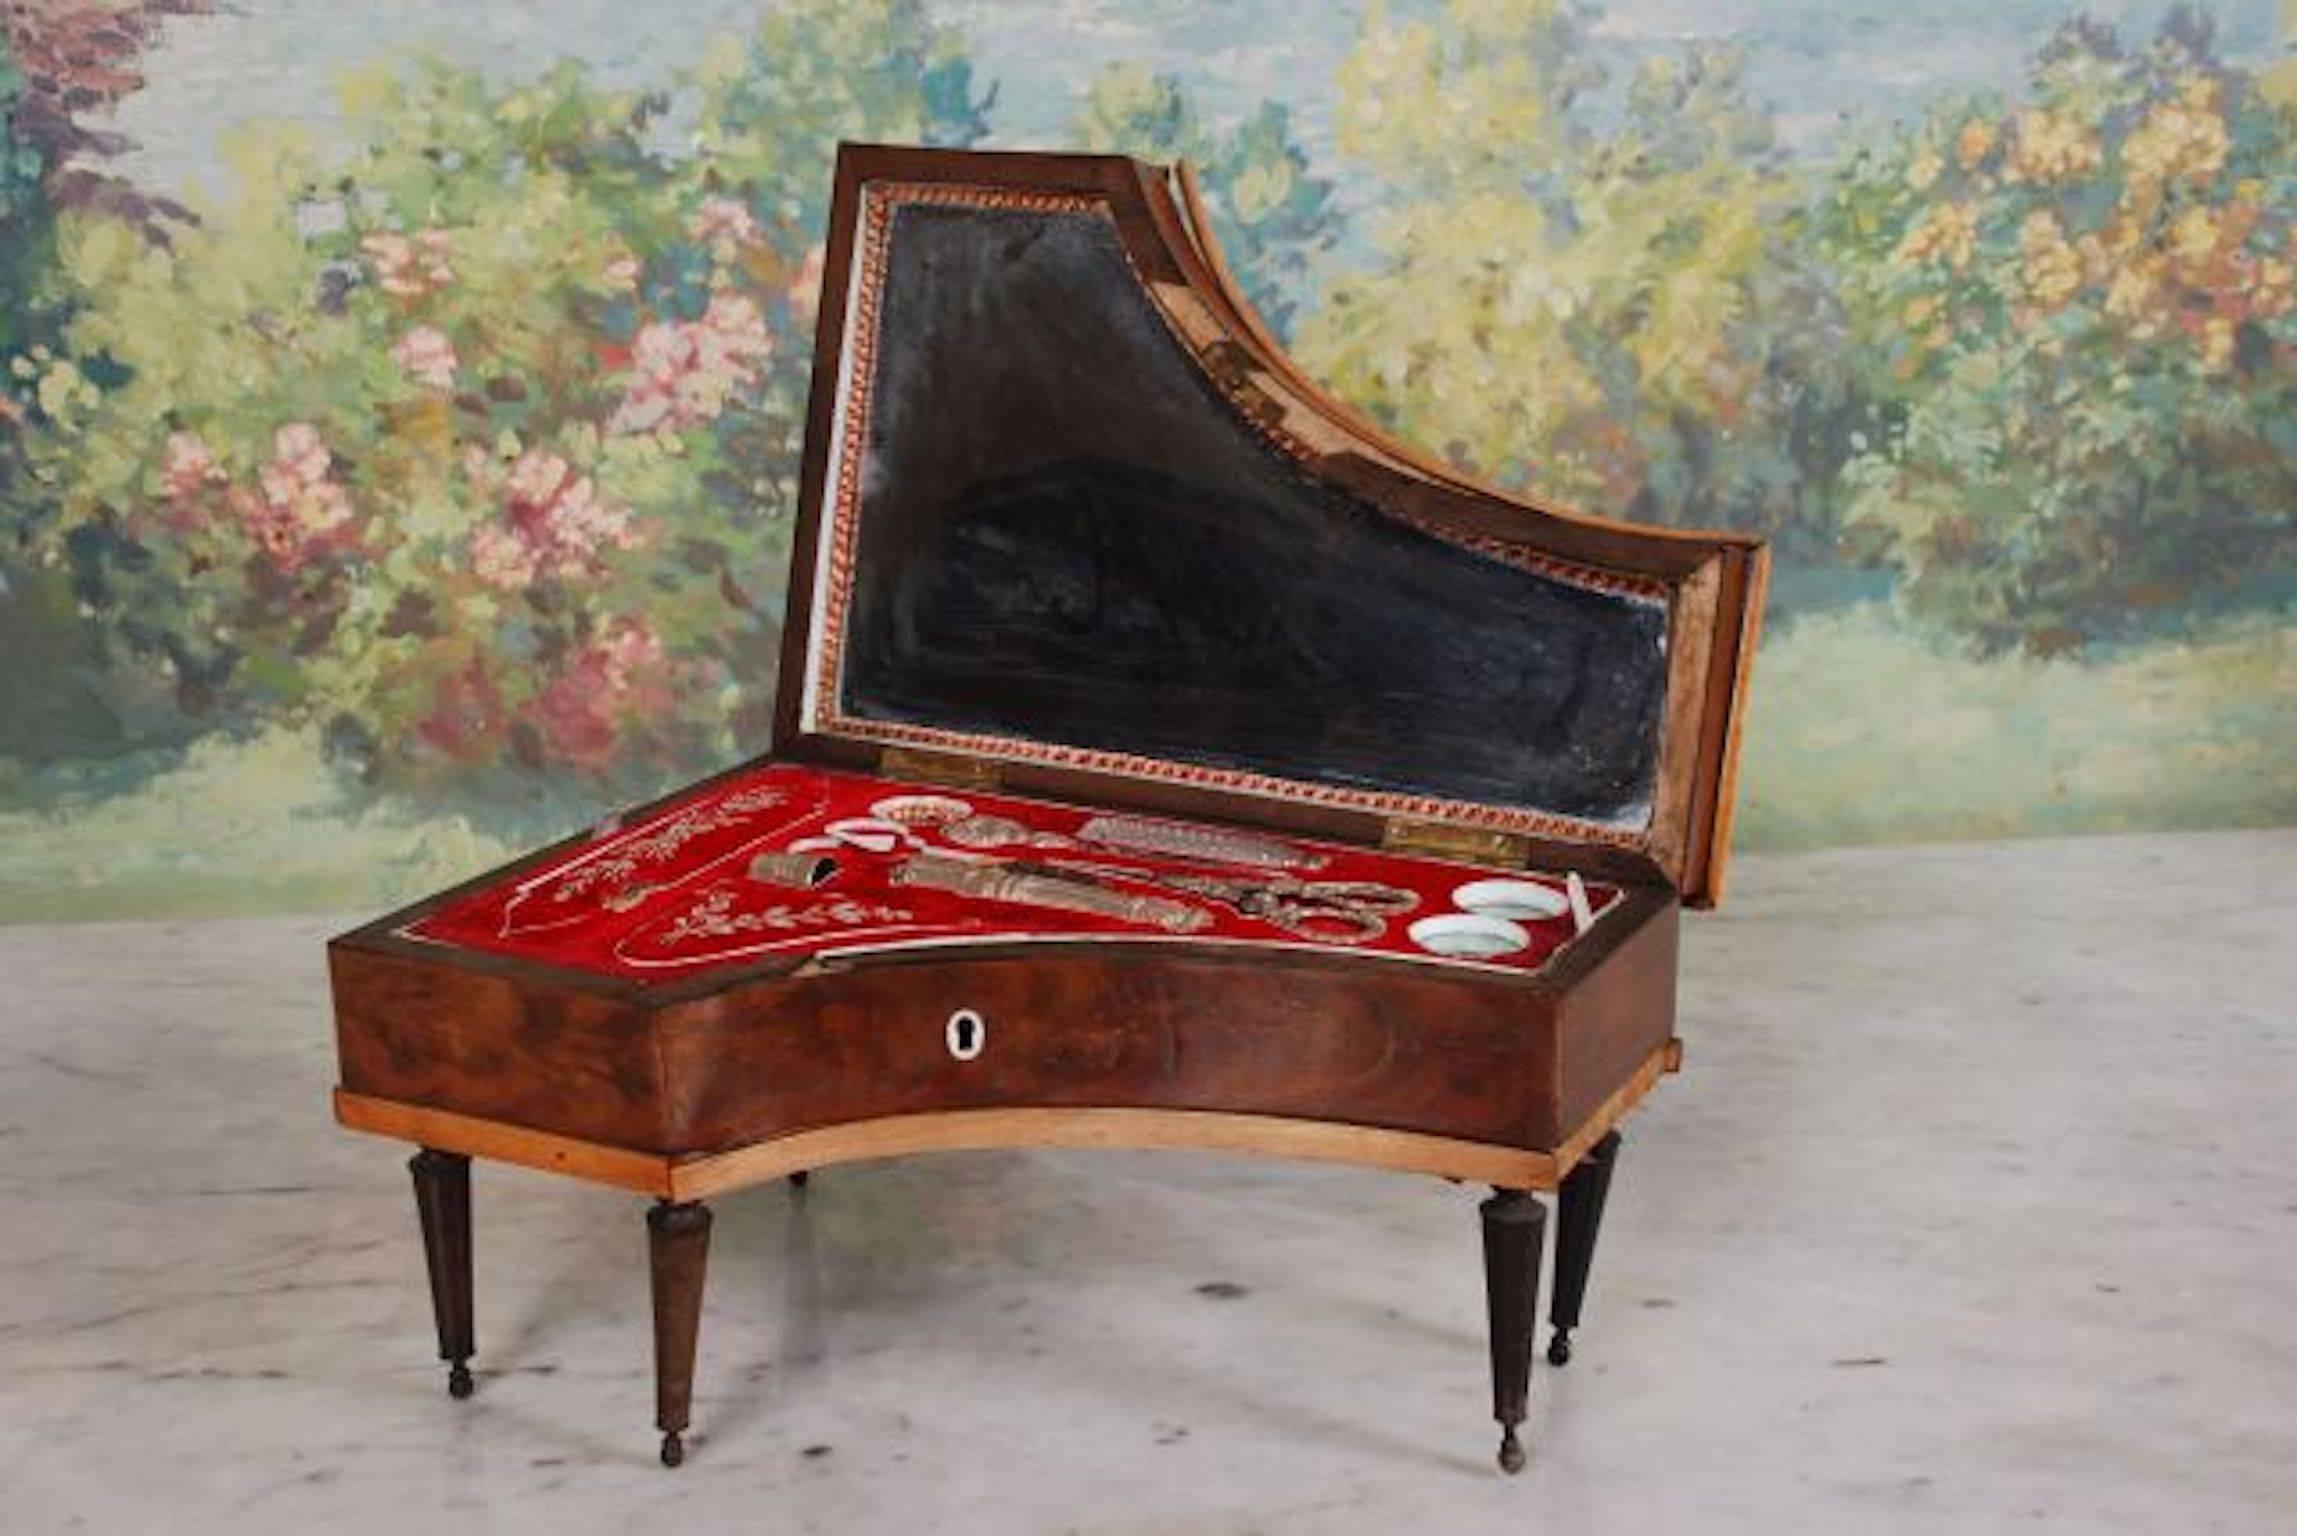 19th century Regency piano form sewing box circa 1820 with fitted red velvet interior.